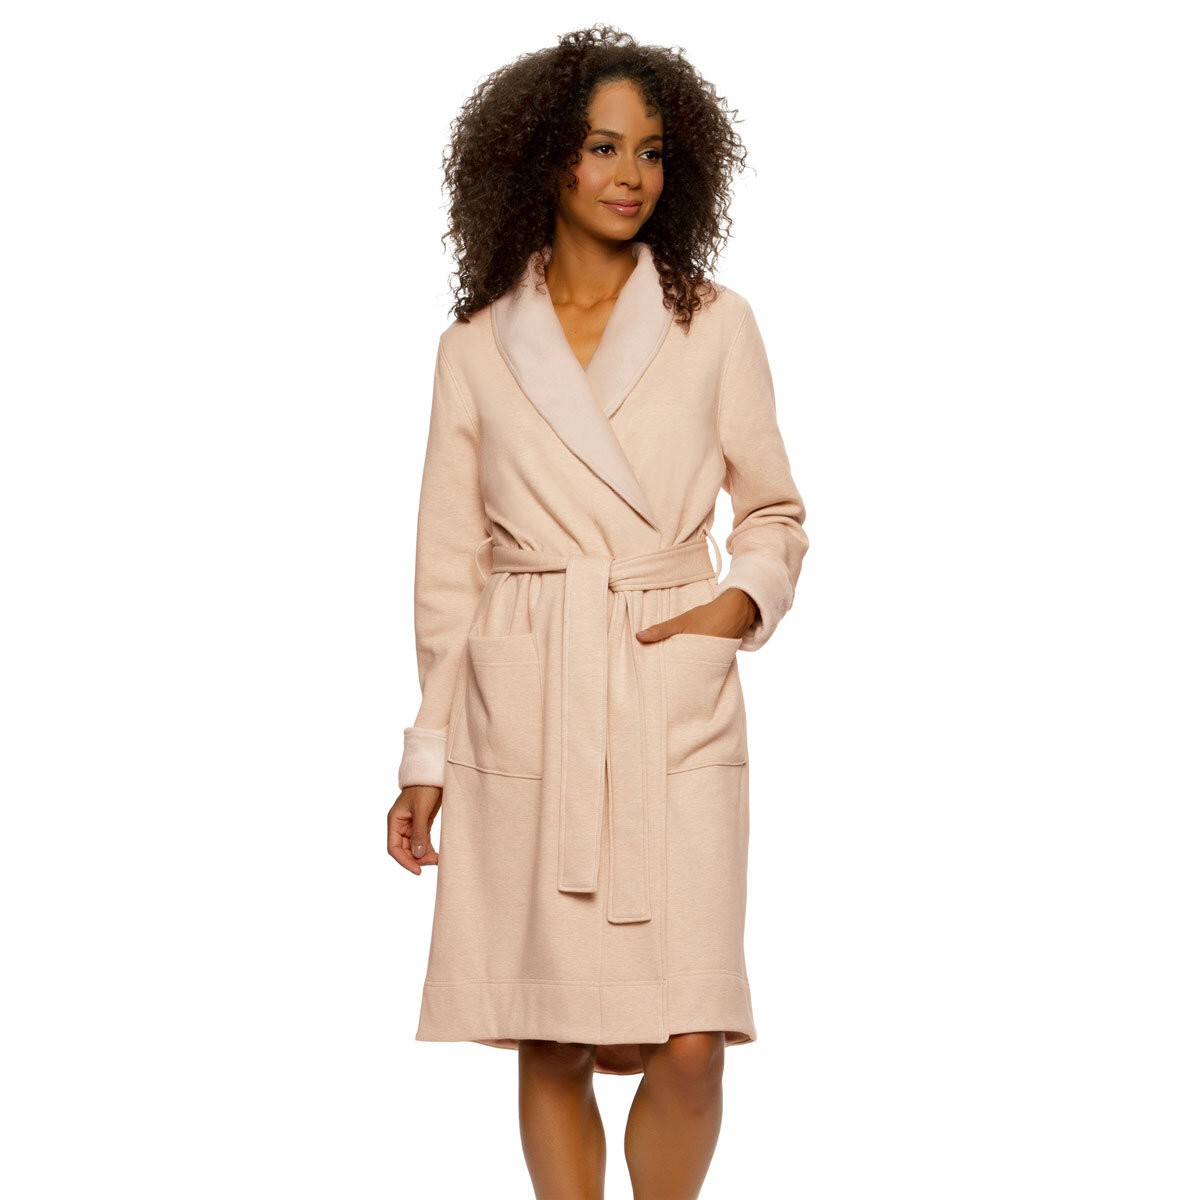 Kirkland Signature Women's Robe in 2 Colours and 4 Sizes